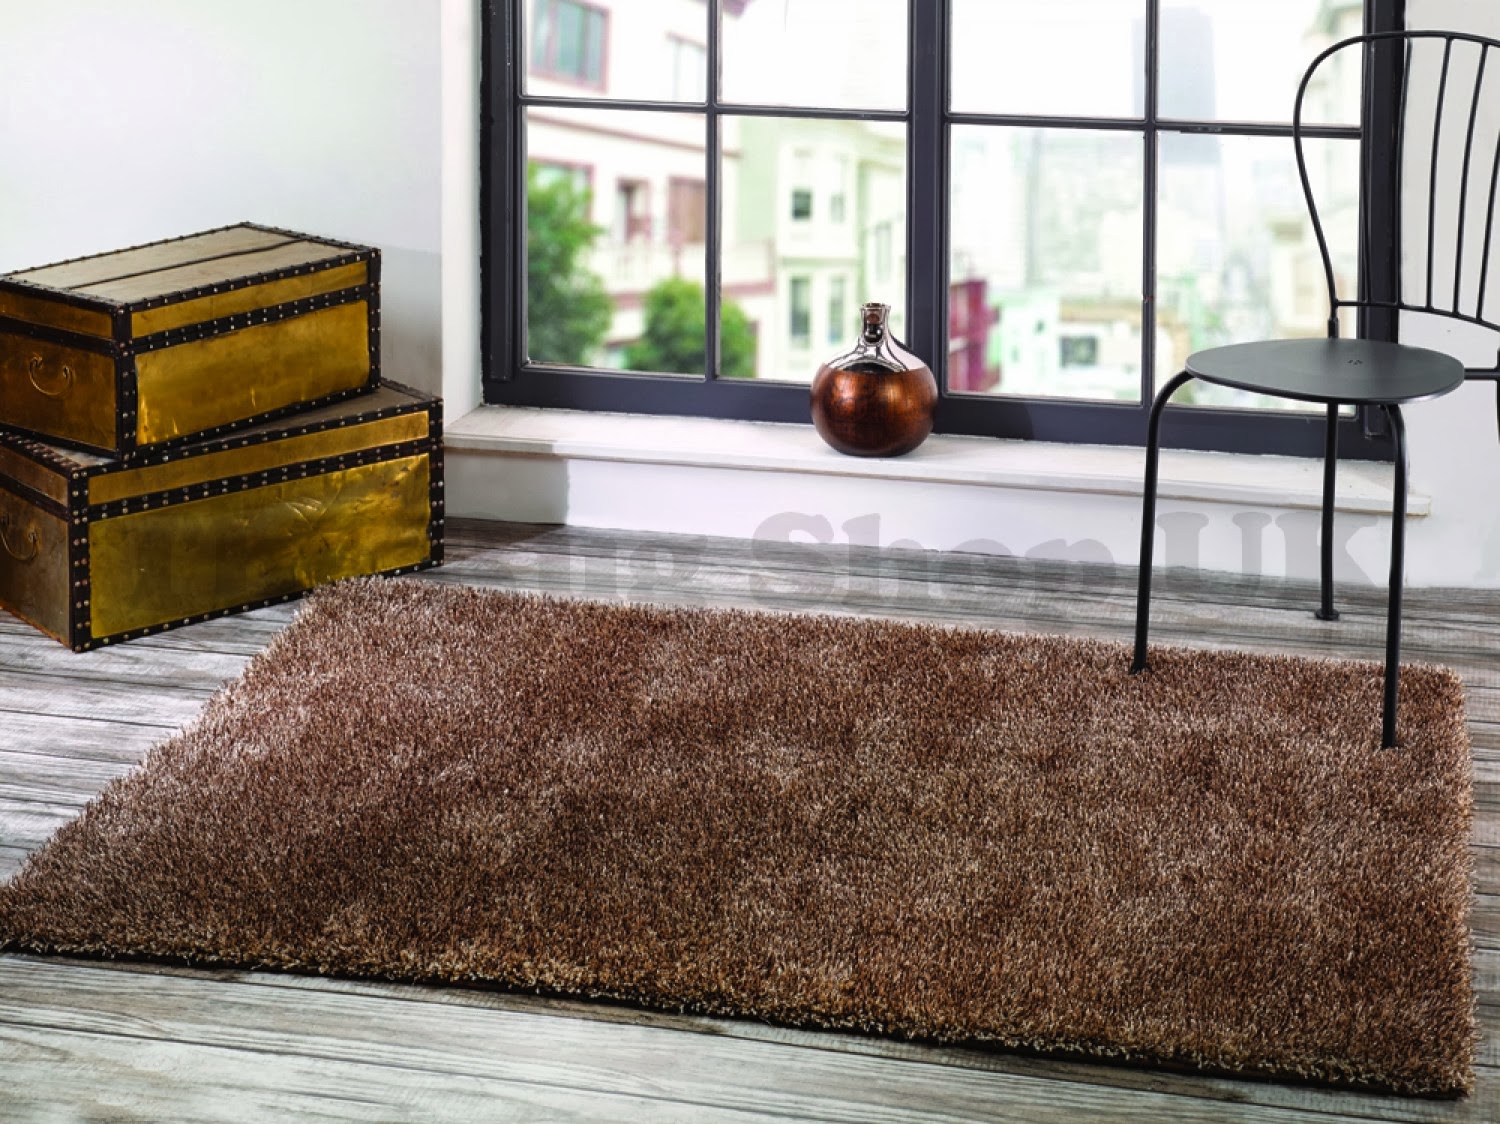 Paramount Beige Mix Shaggy Rug By Flair Rugs